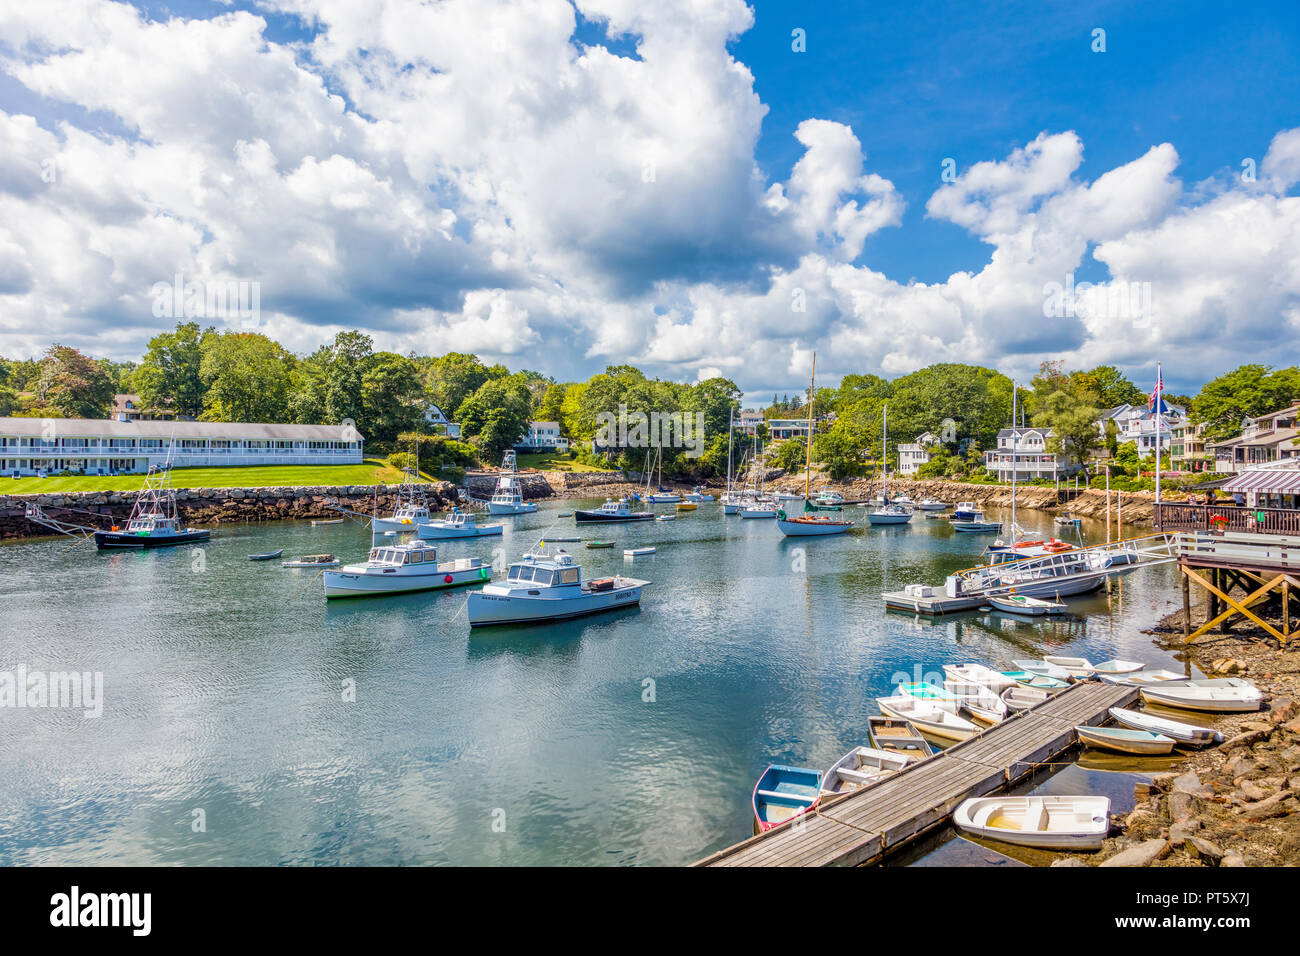 Boats in harbor at Perkins Cove in Ogunquit  Maine in the United States Stock Photo